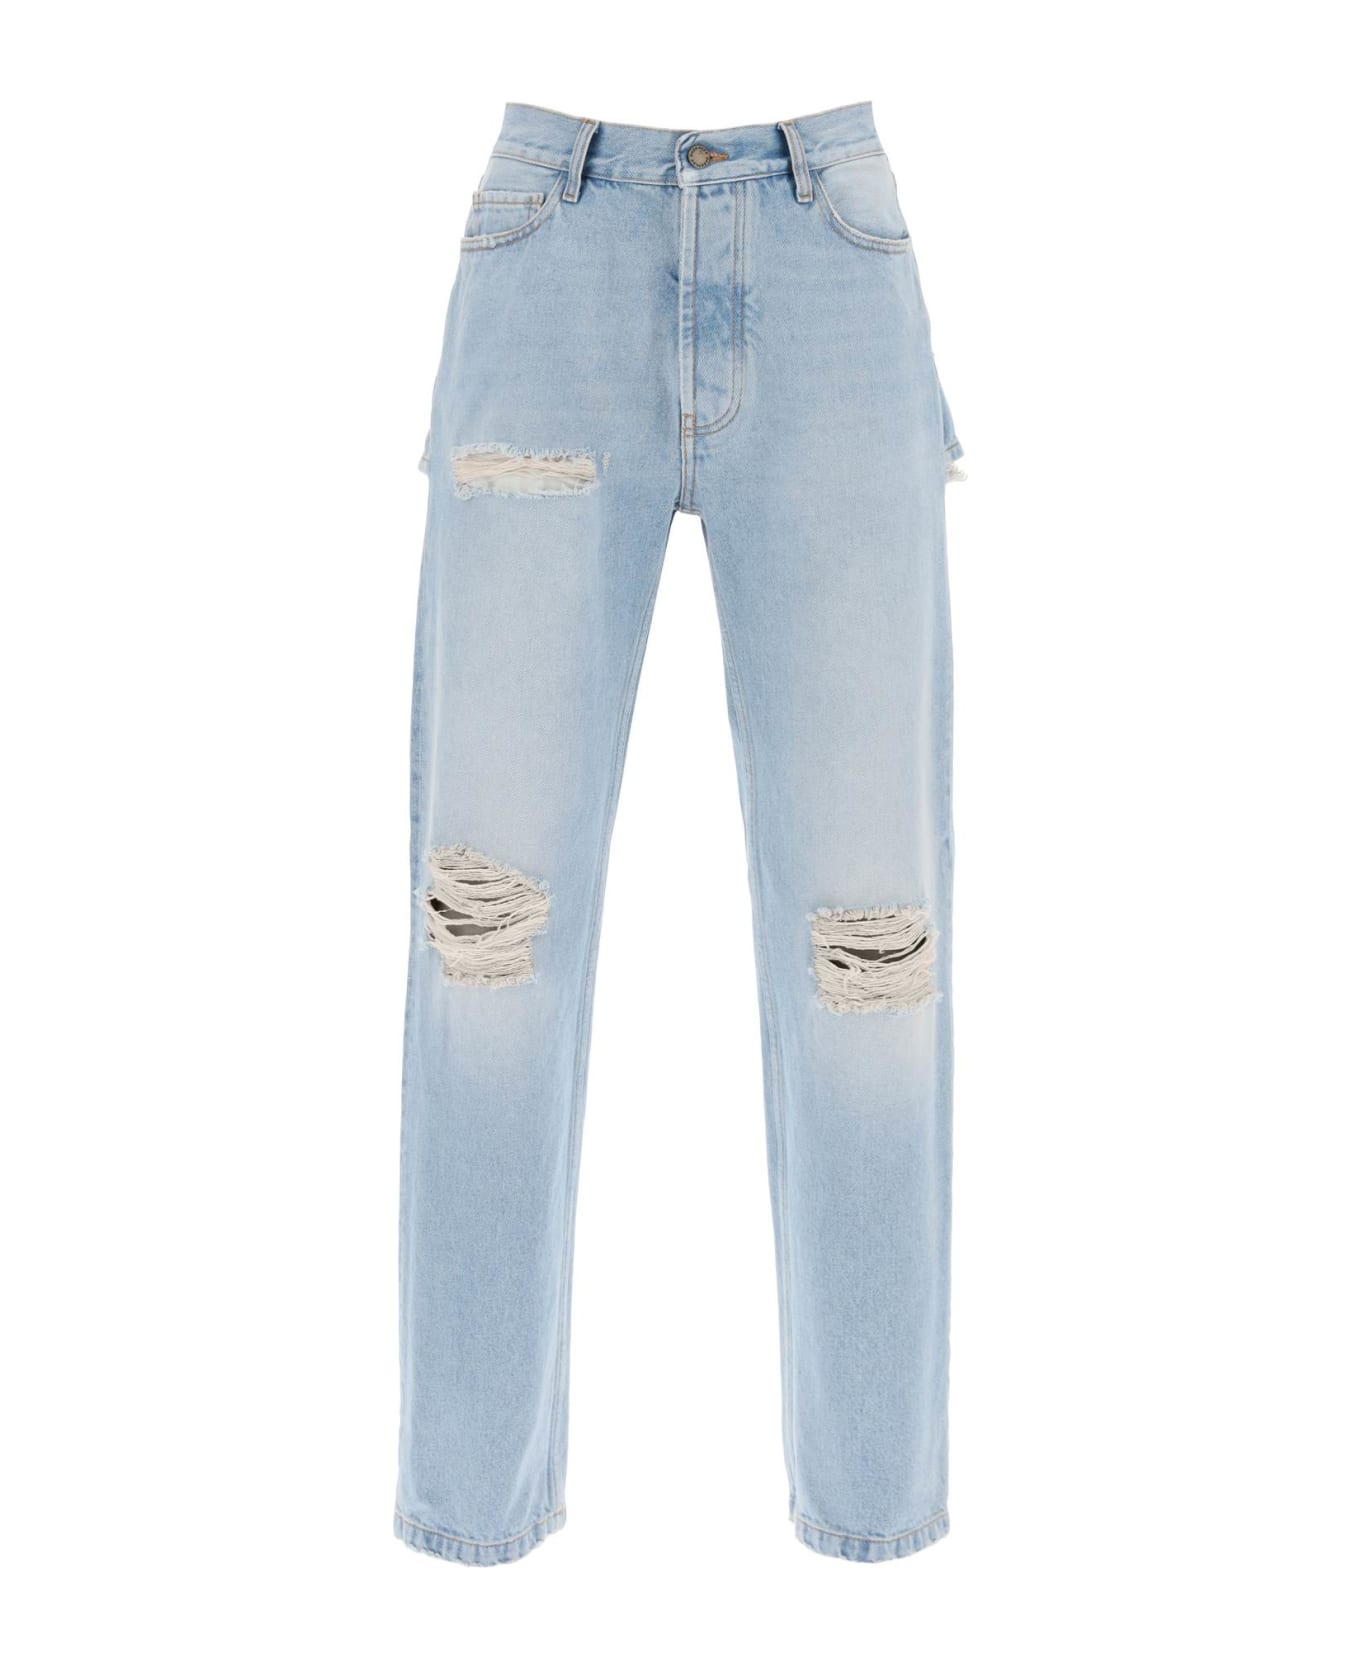 DARKPARK Naomi Jeans With Rips And Cut Outs - LIGHT WASH RIPPED (Light blue)